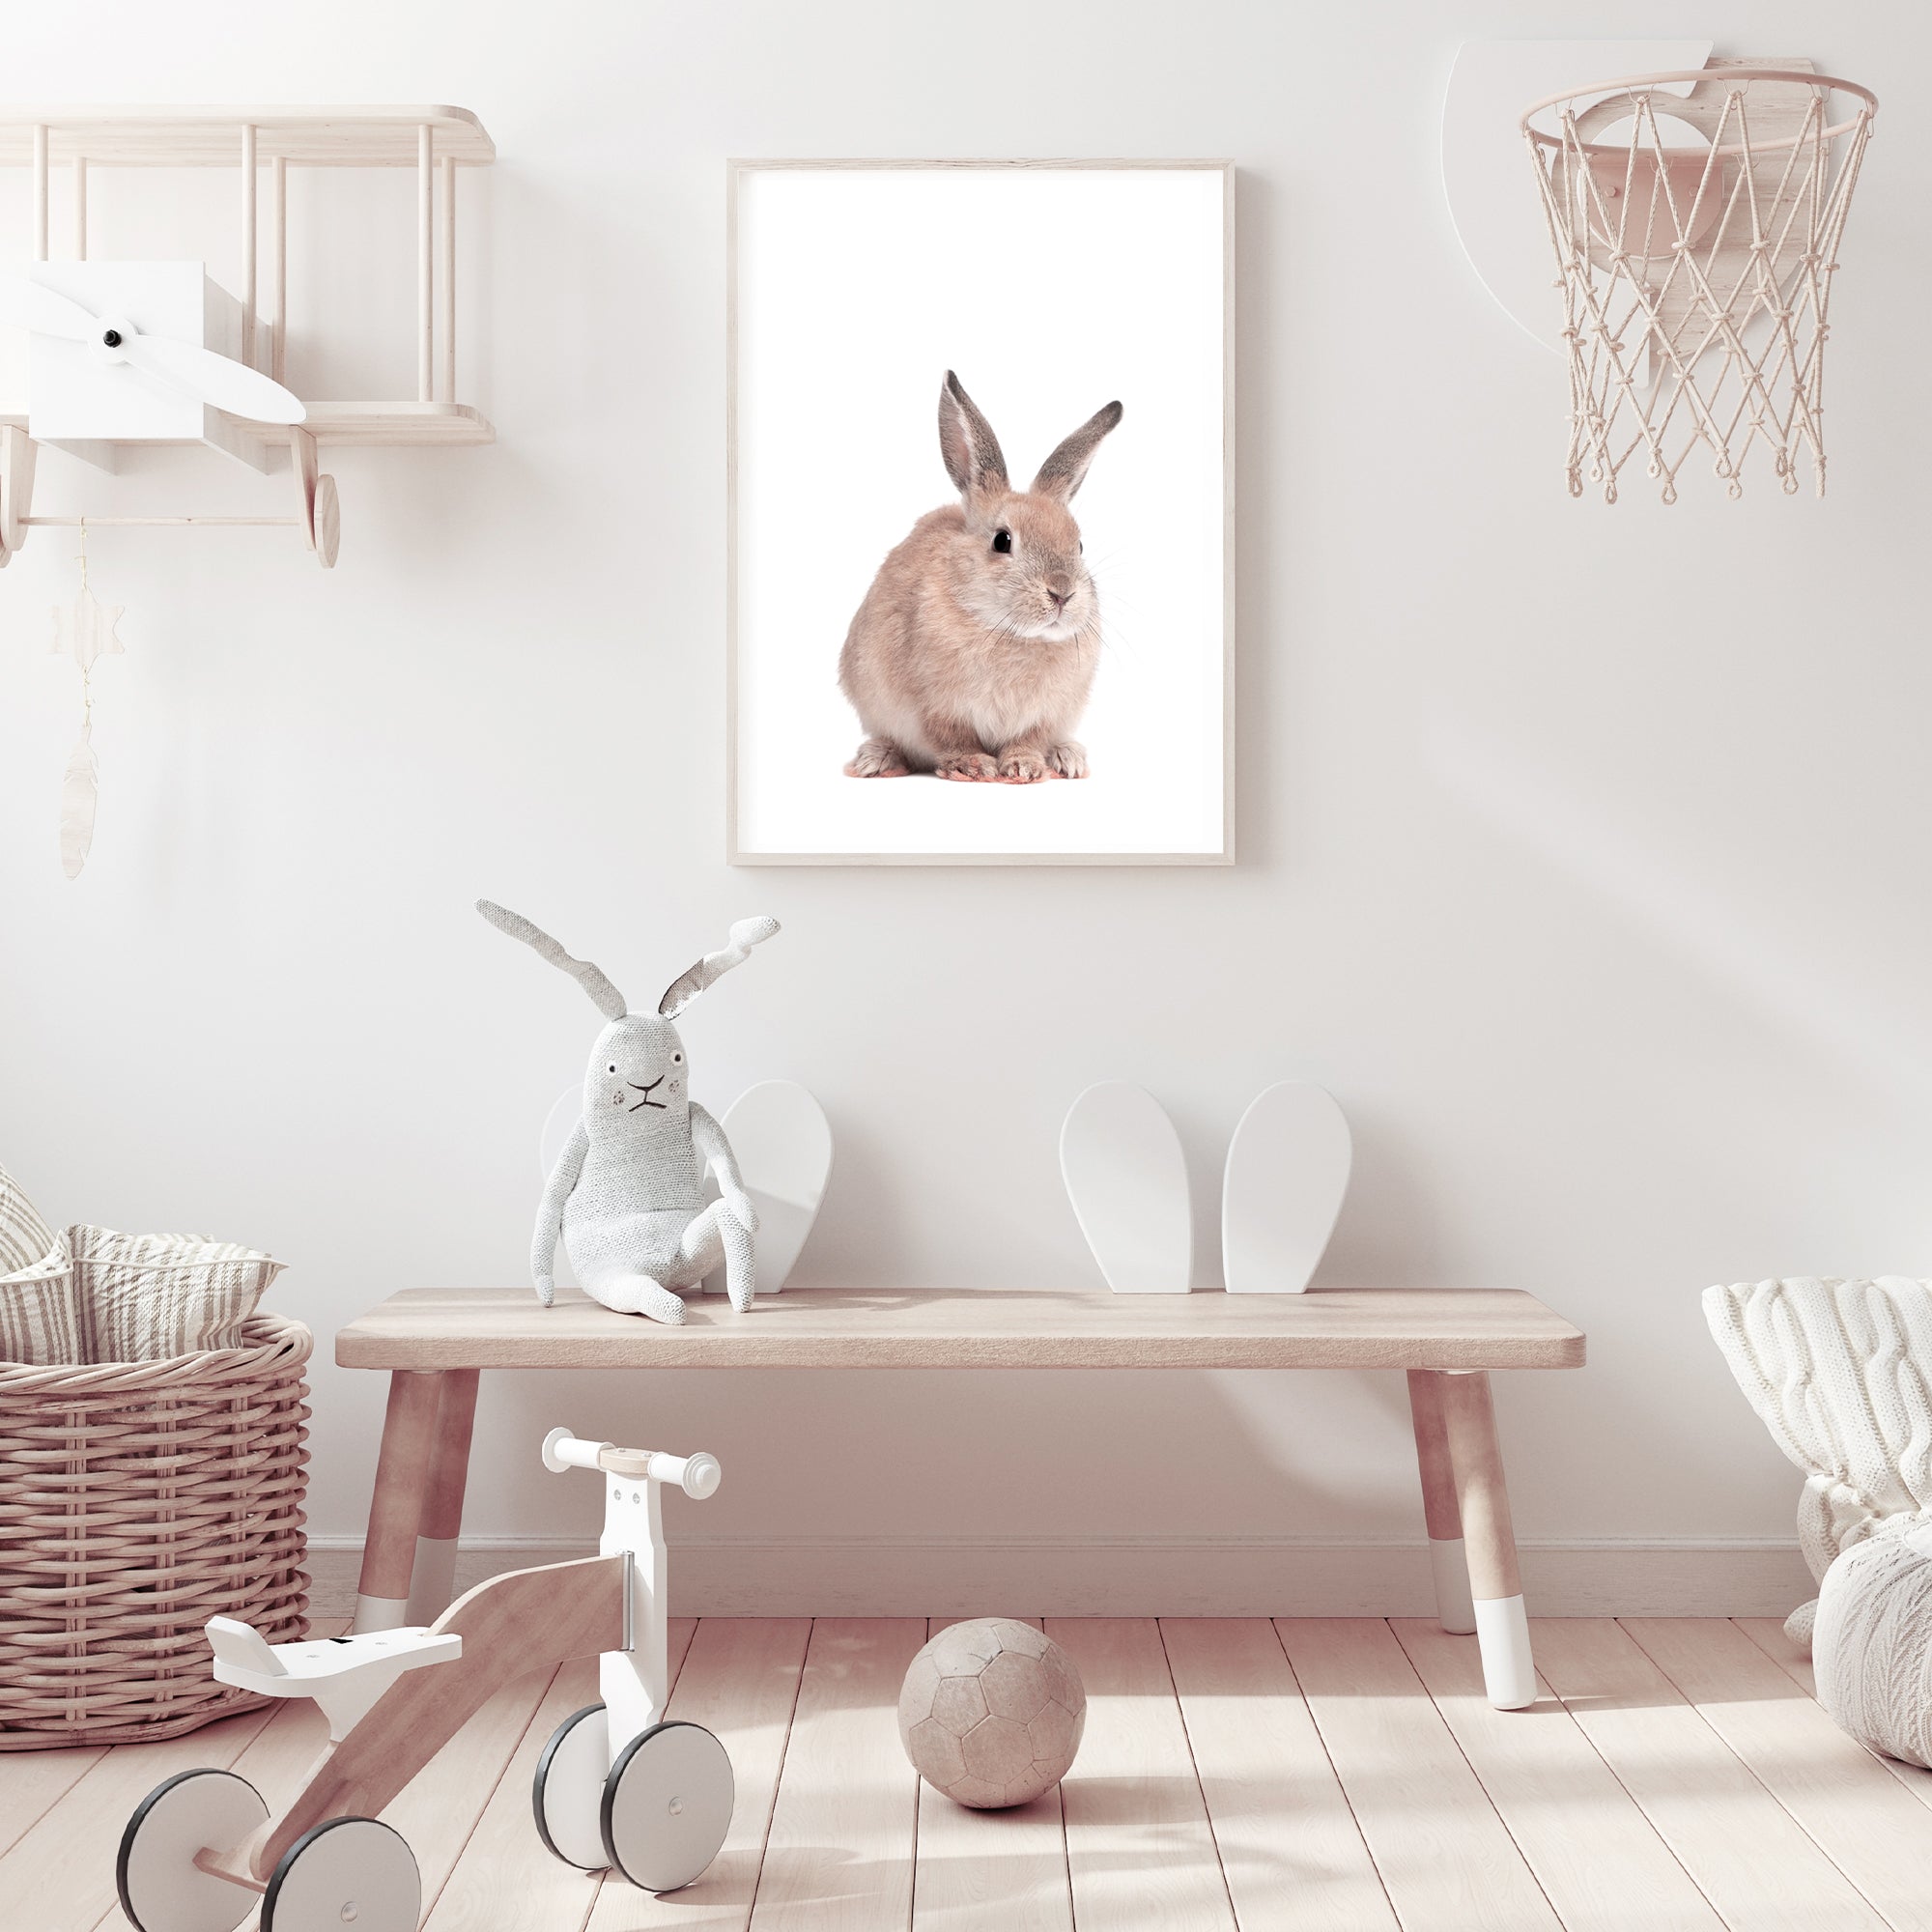 Featuring the Animal Baby Bunny Rabbit photo art print, available in an unframed poster print, stretched canvas or with a timber, white or black frame.